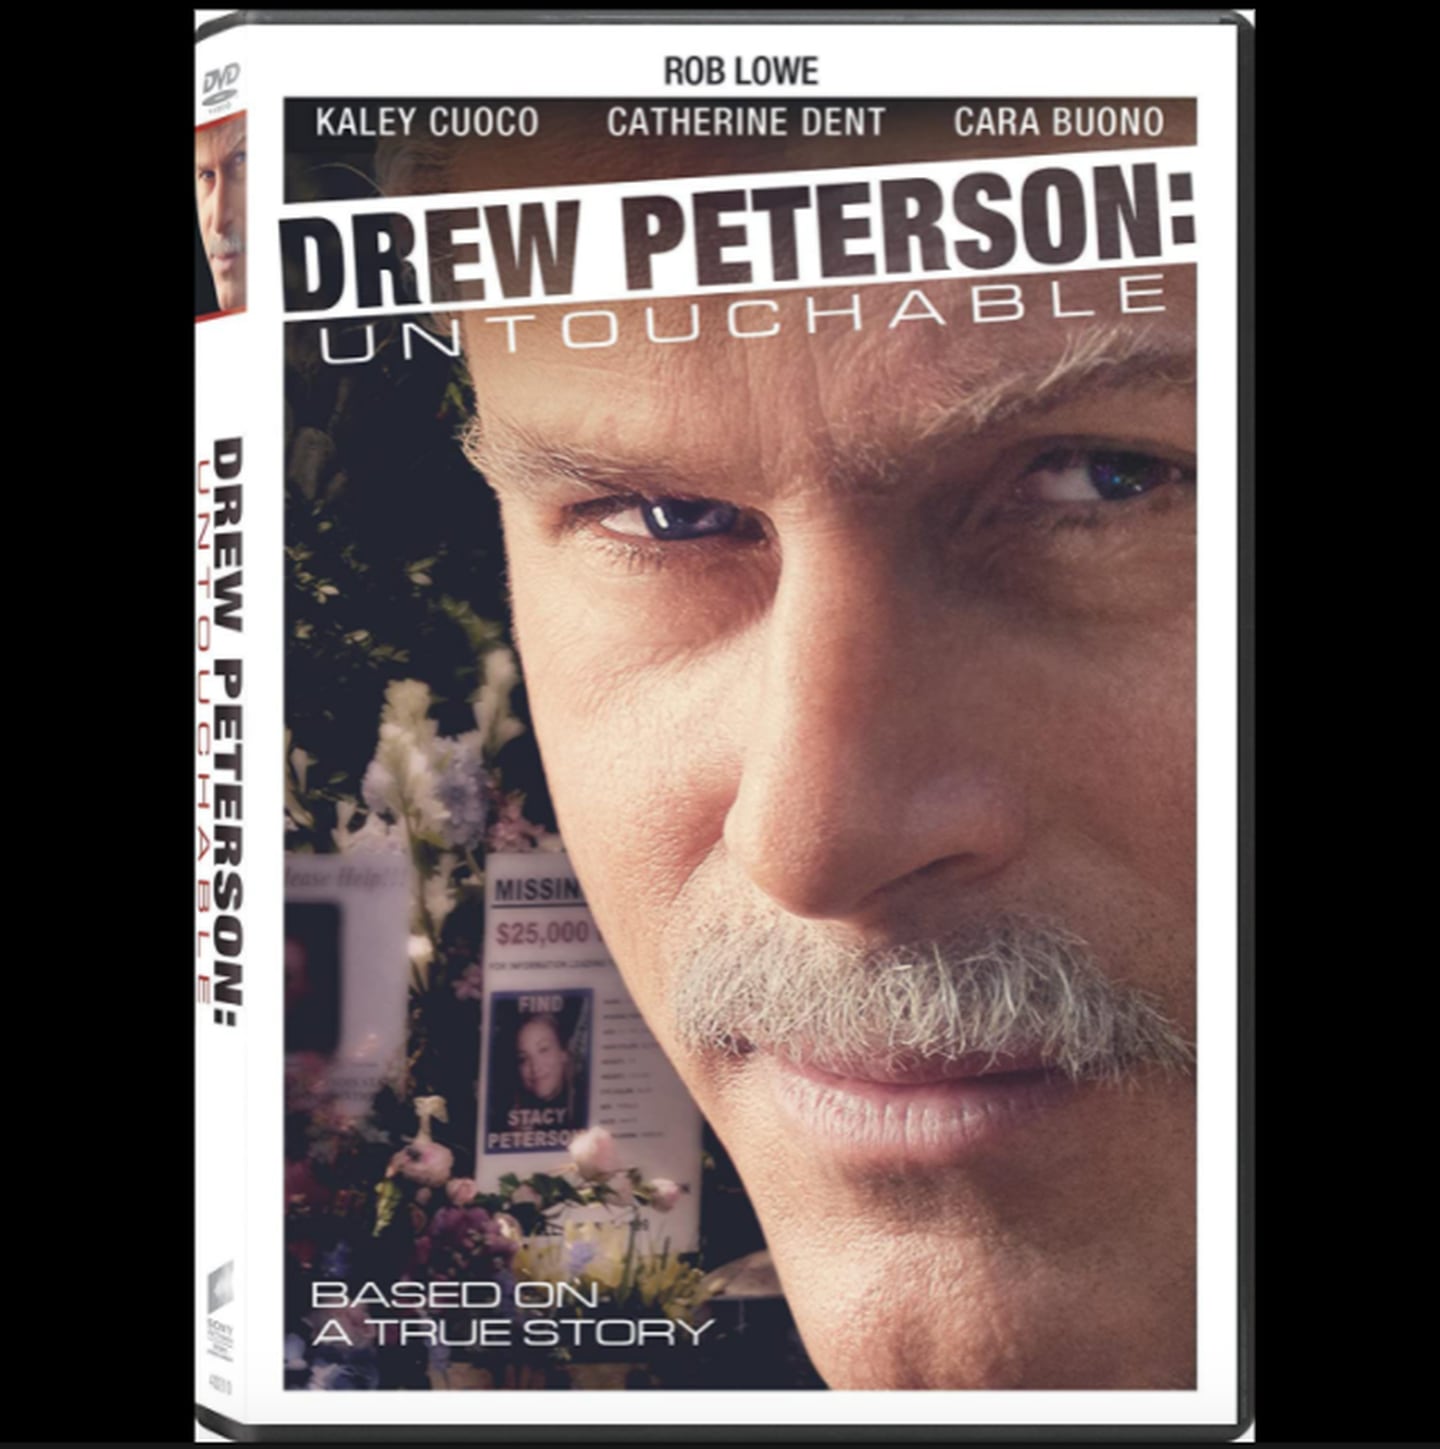 If you haven't already seen "Drew Peterson: Untouchable," you probably should.